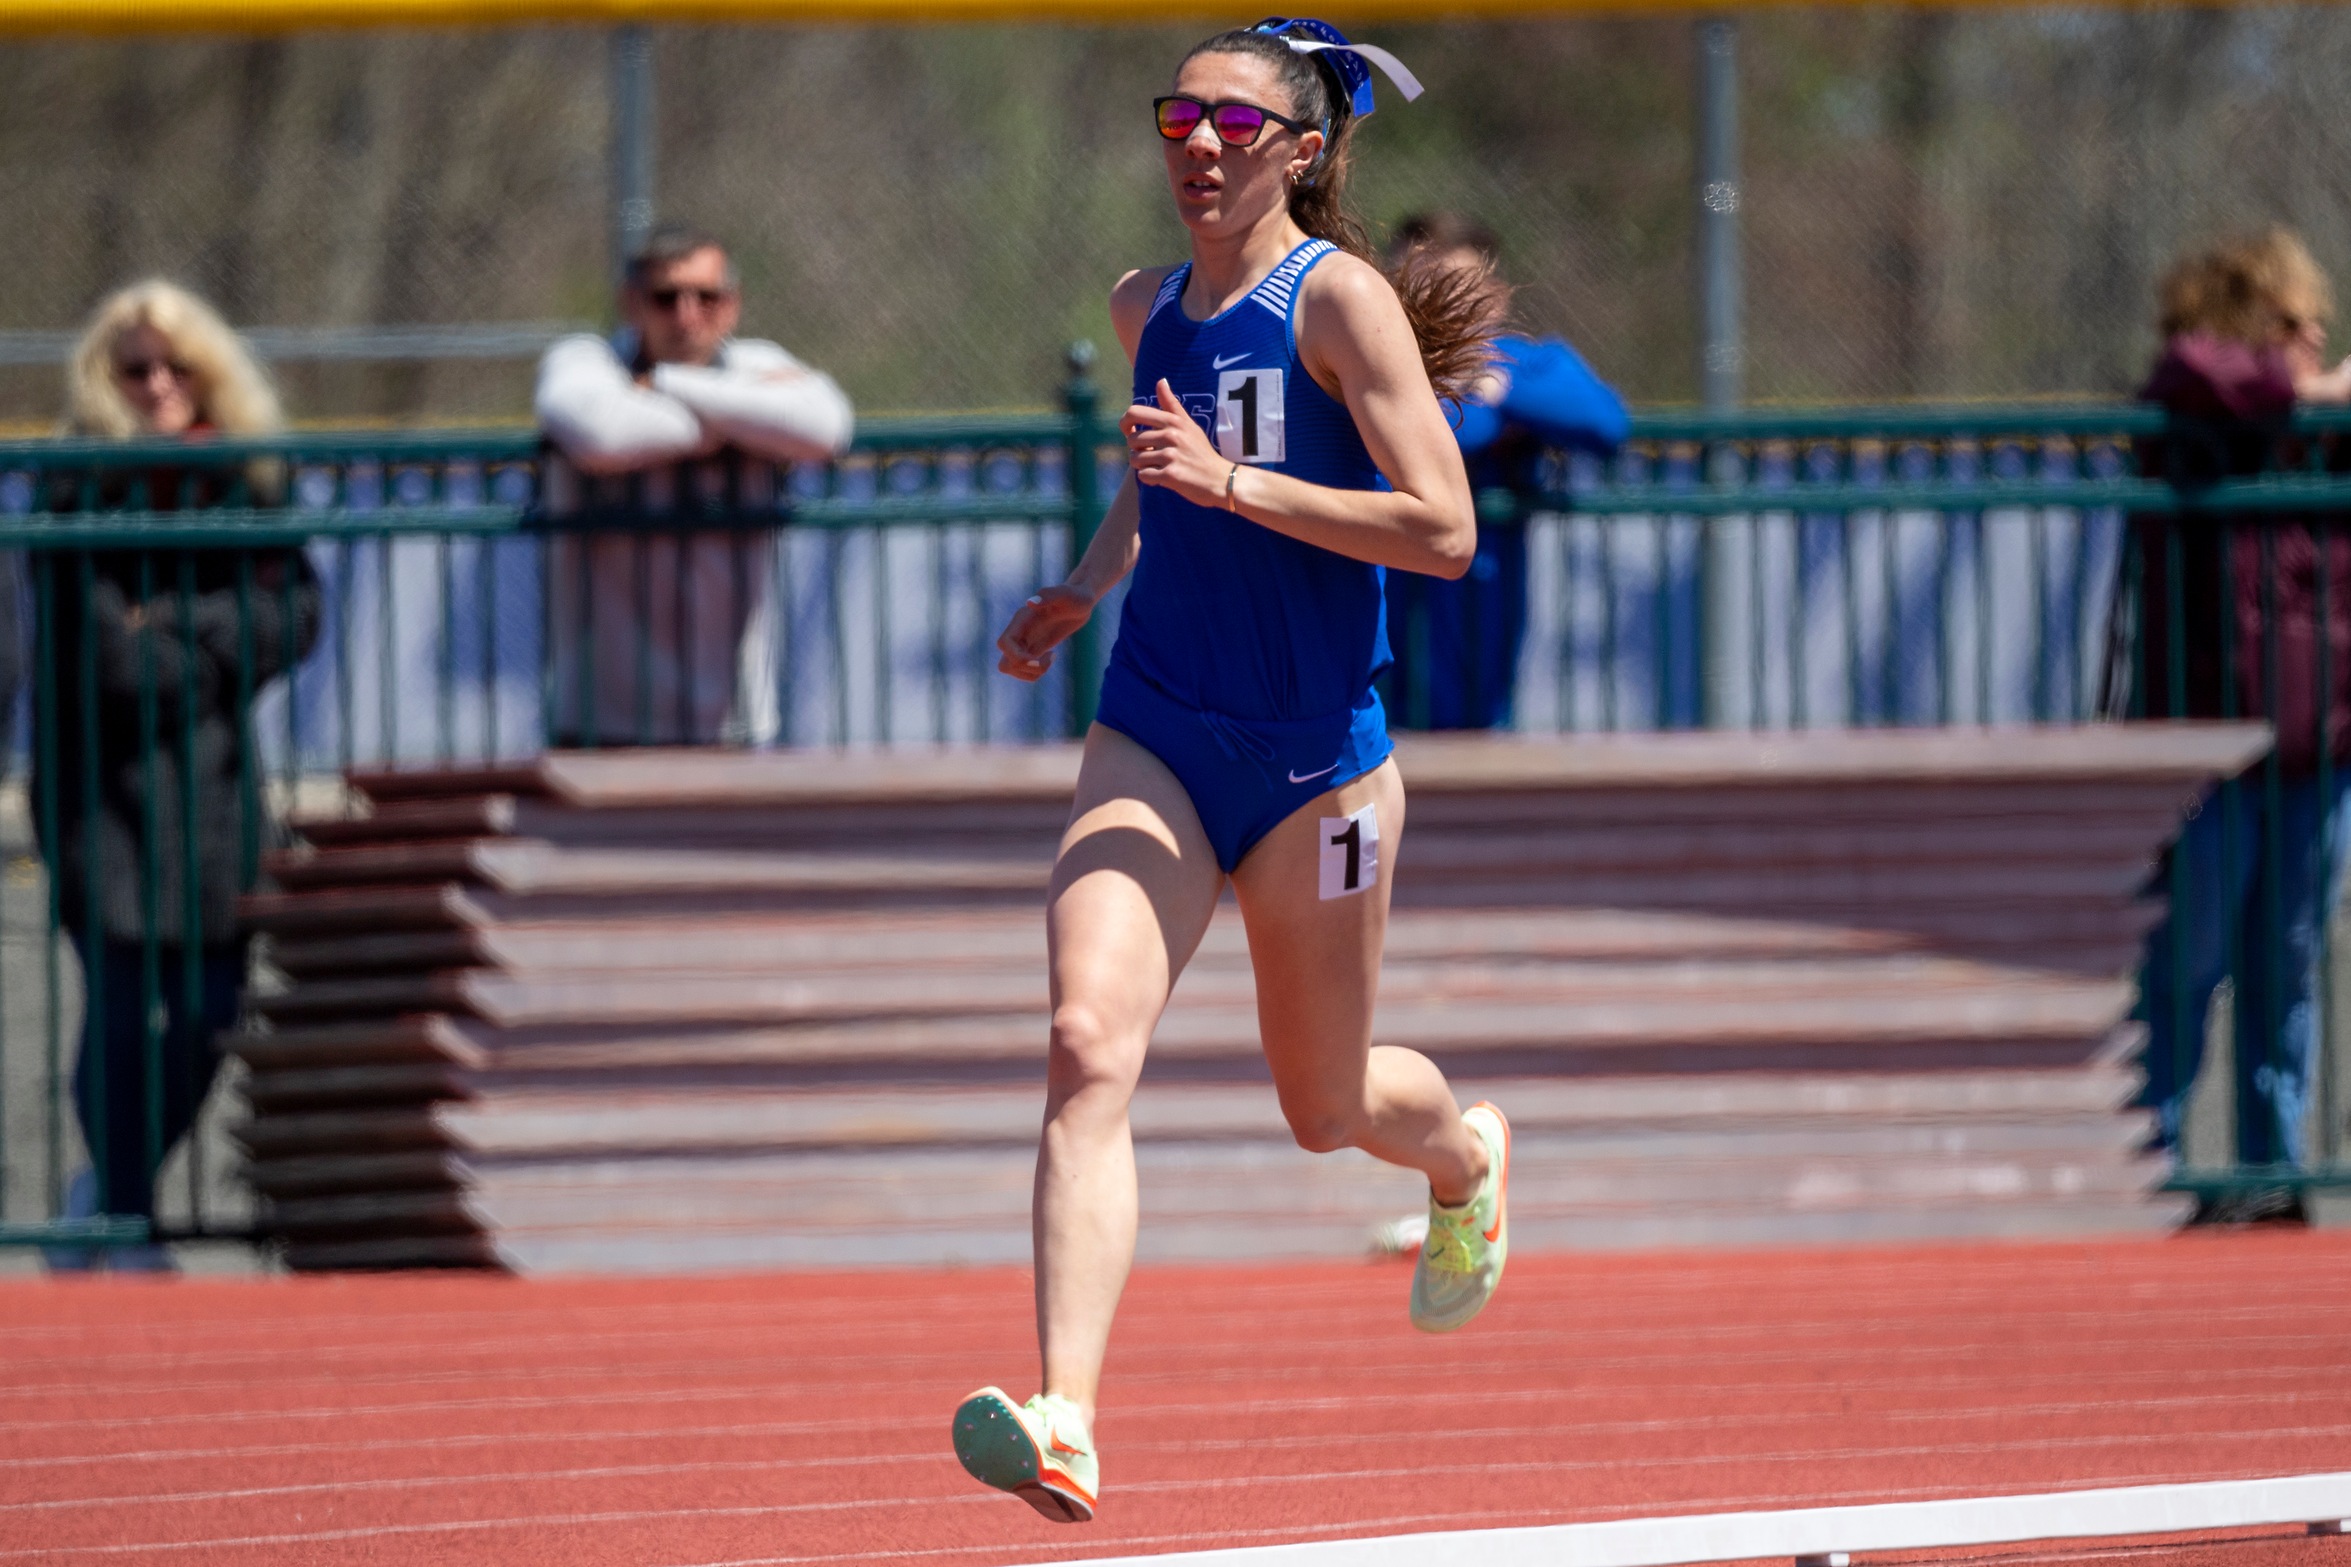 Angie Rafter set a school record in the 5,000m run on Saturday.